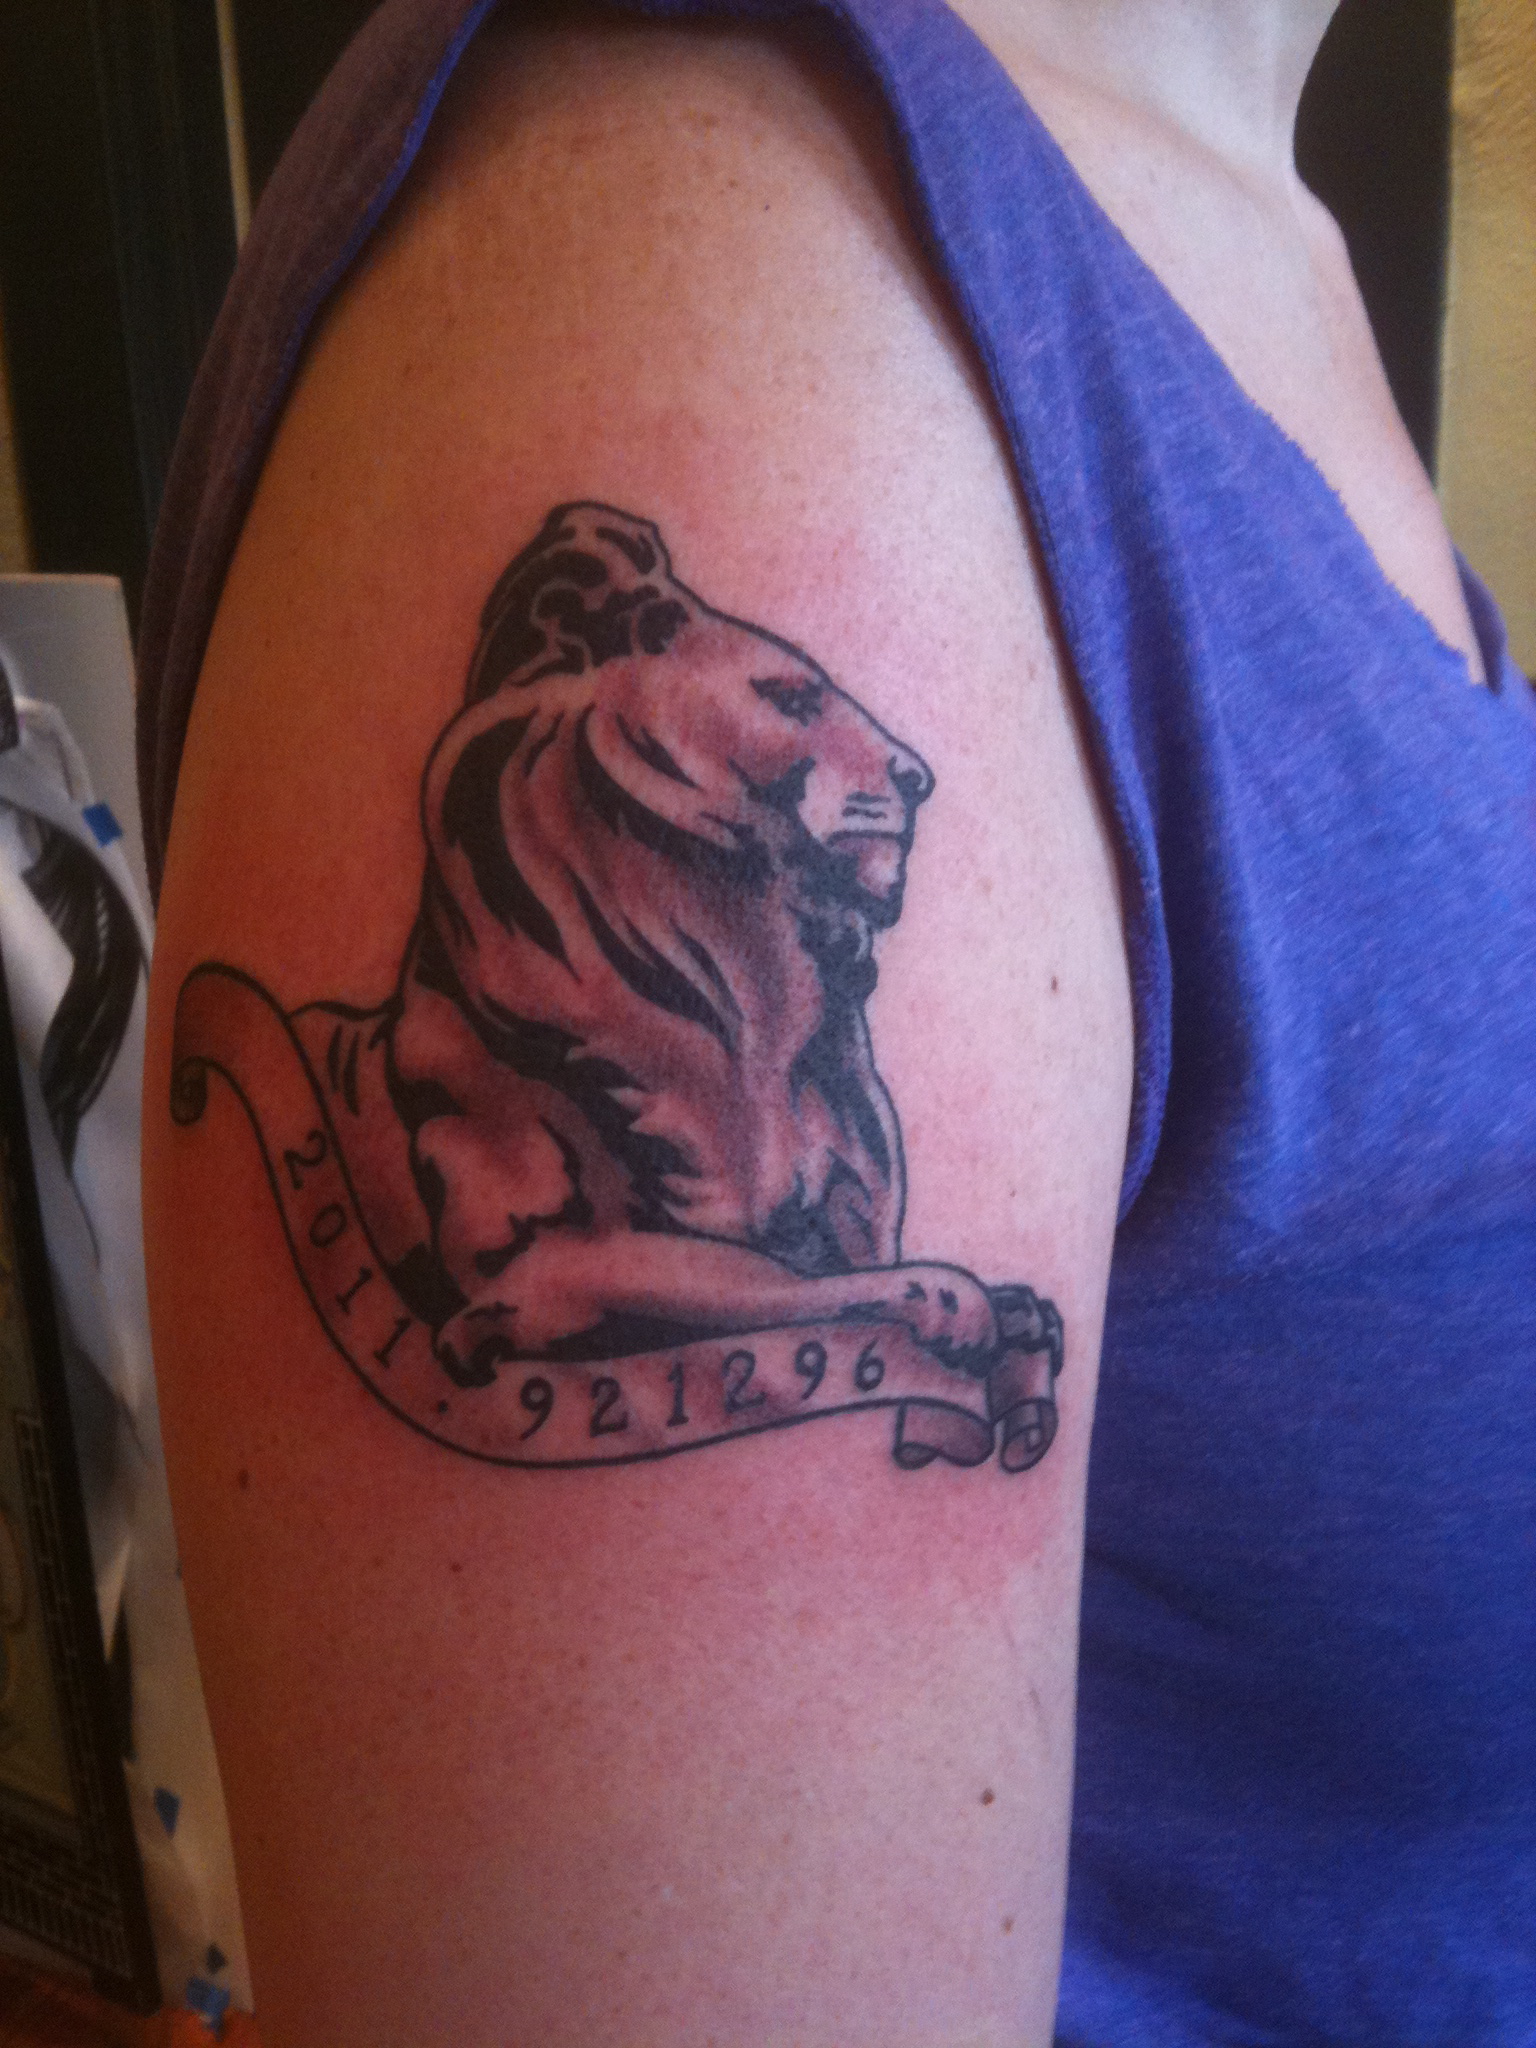 The library lion tattoo has